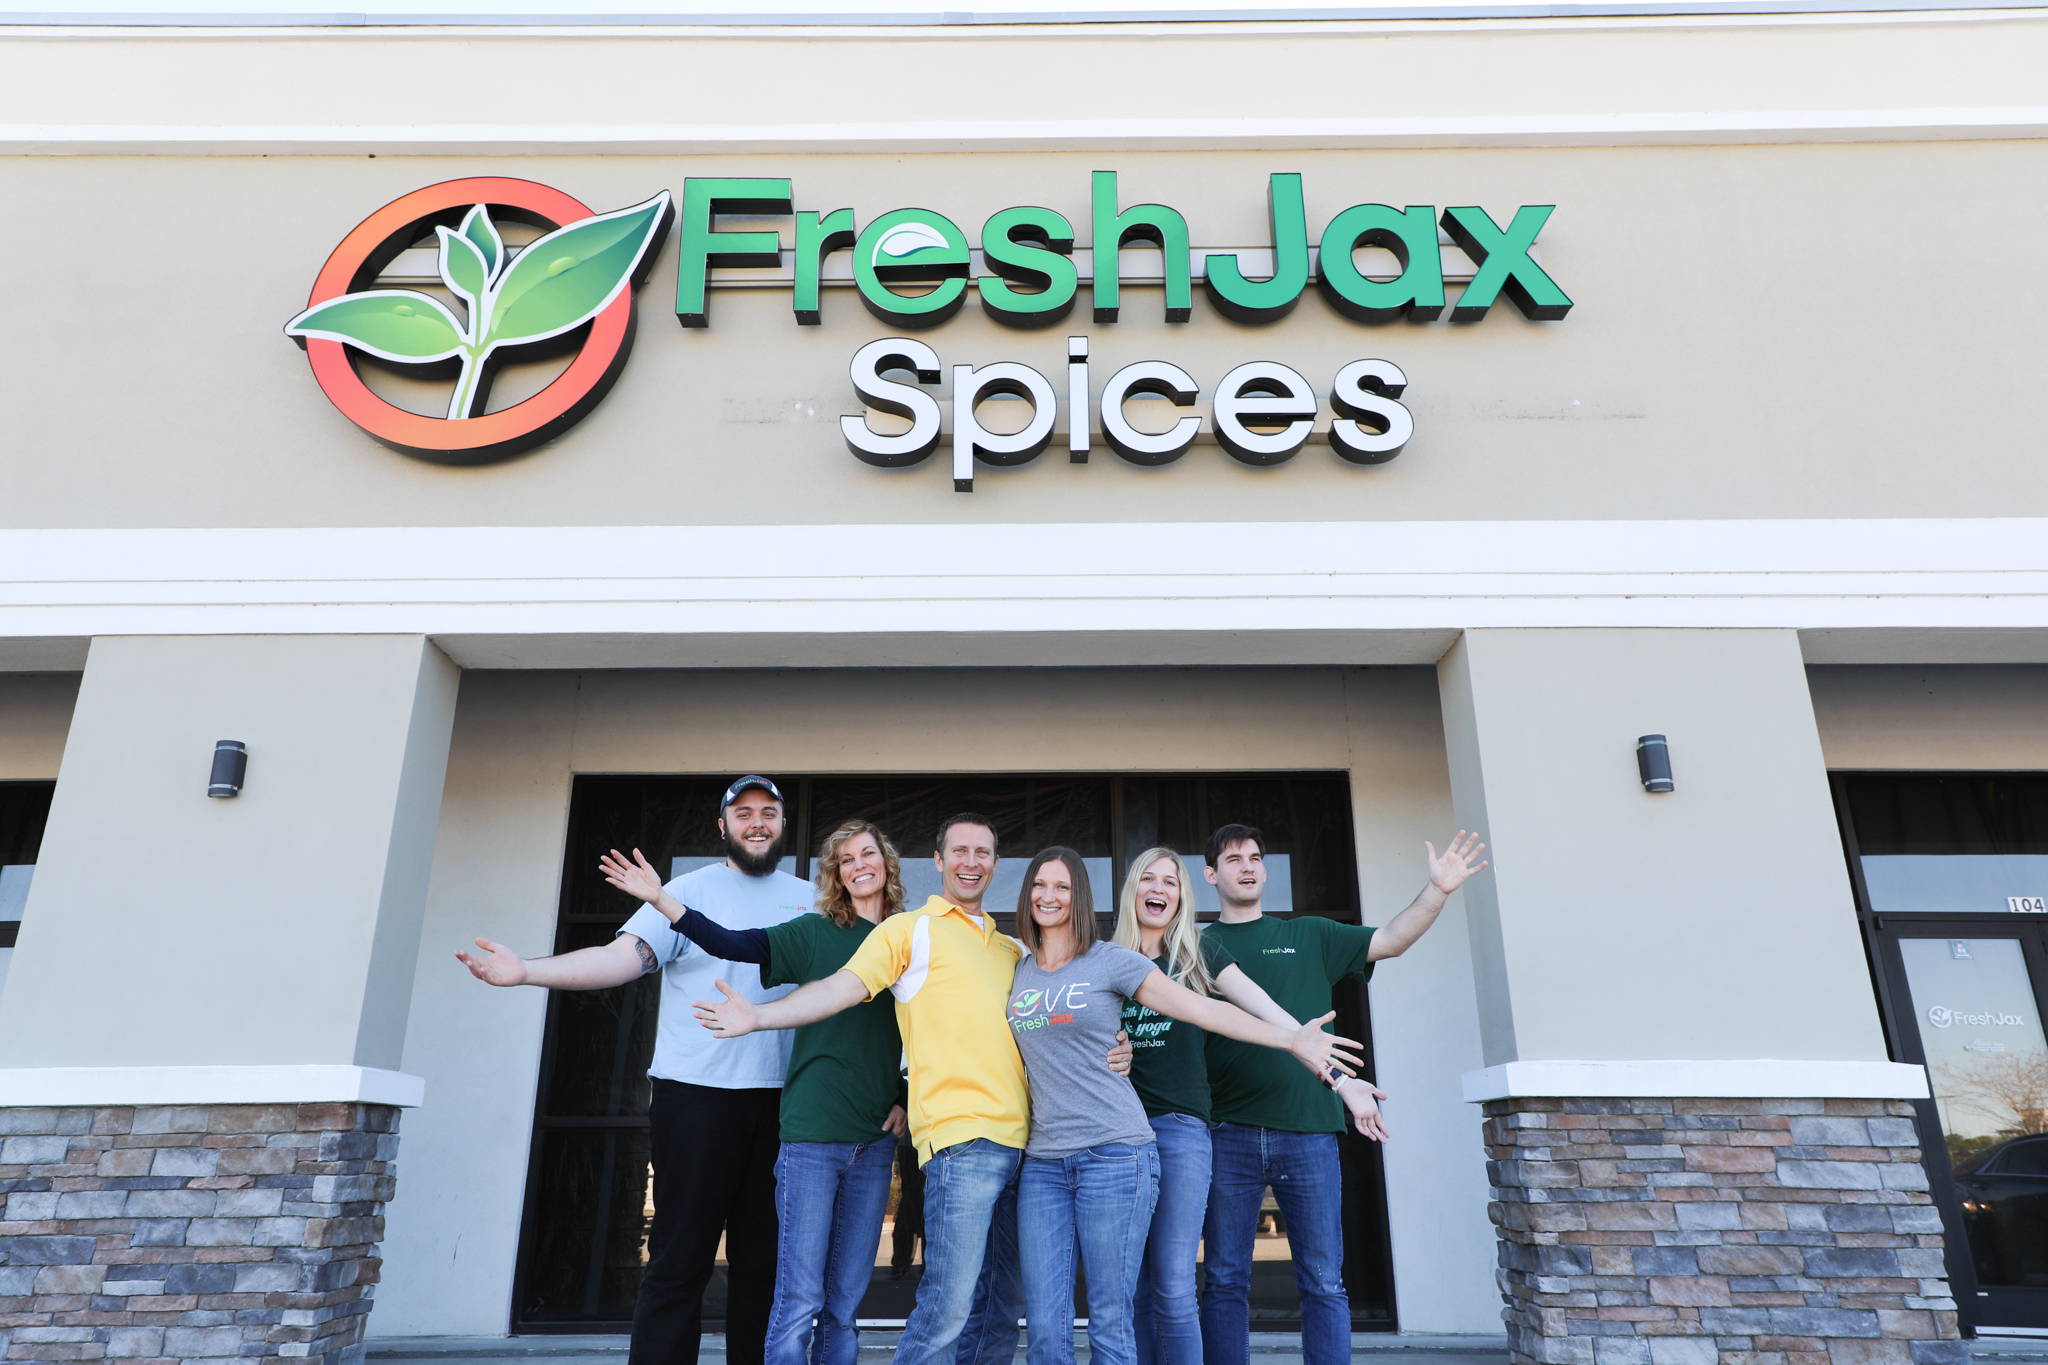 FreshJax Team In Front of Store